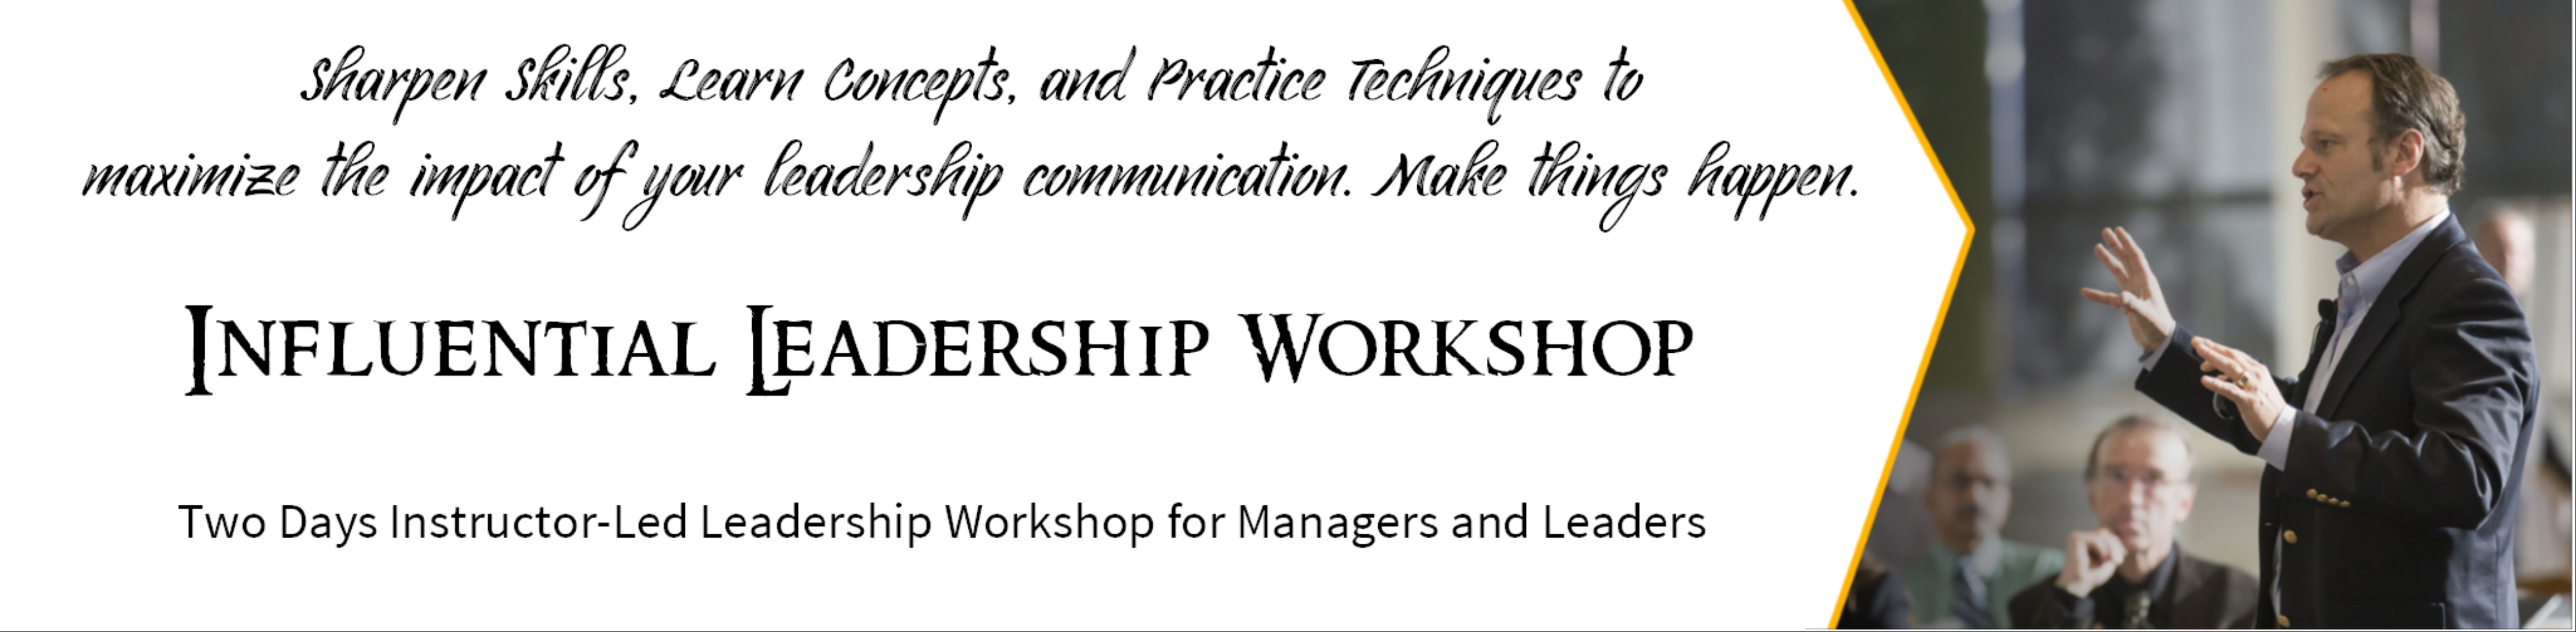 Influential Leadership - Workshop for Managers and Leaders @ Chennai, Chennai, Tamil Nadu, India